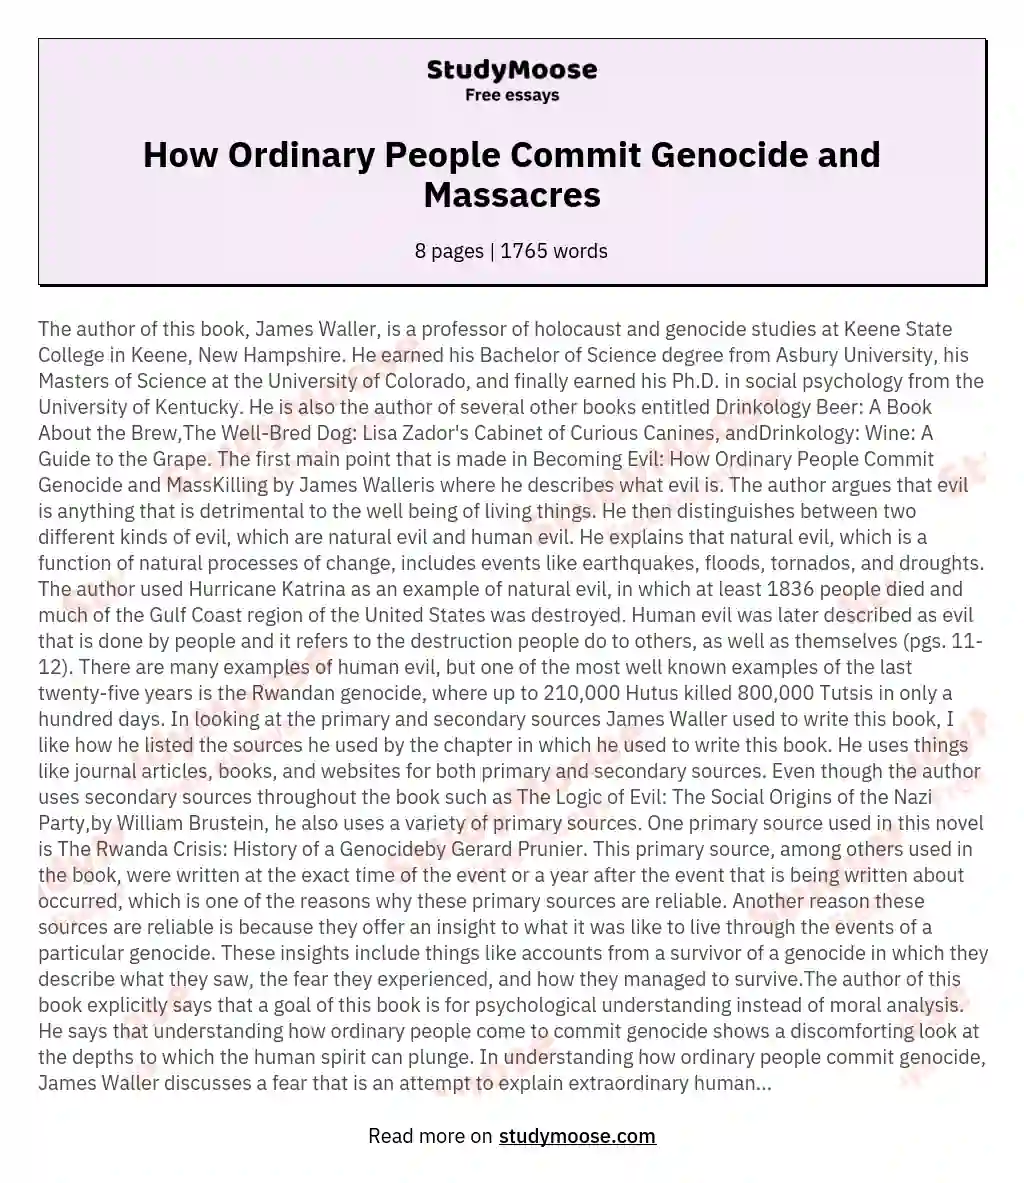 How Ordinary People Commit Genocide and Massacres essay